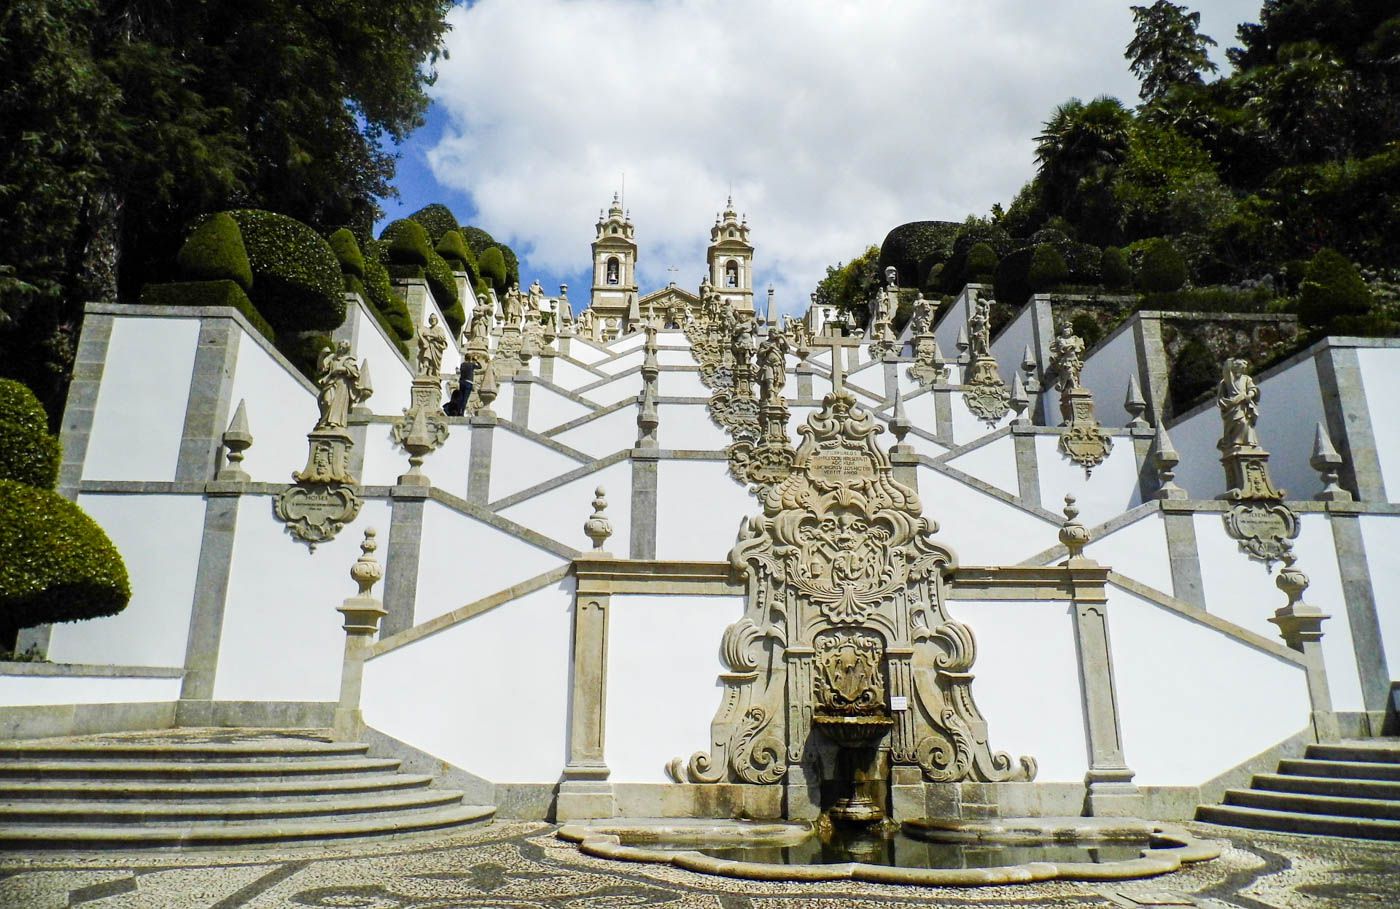 Braga Food Tour: How To Best Enjoy Your Day Trip From Porto